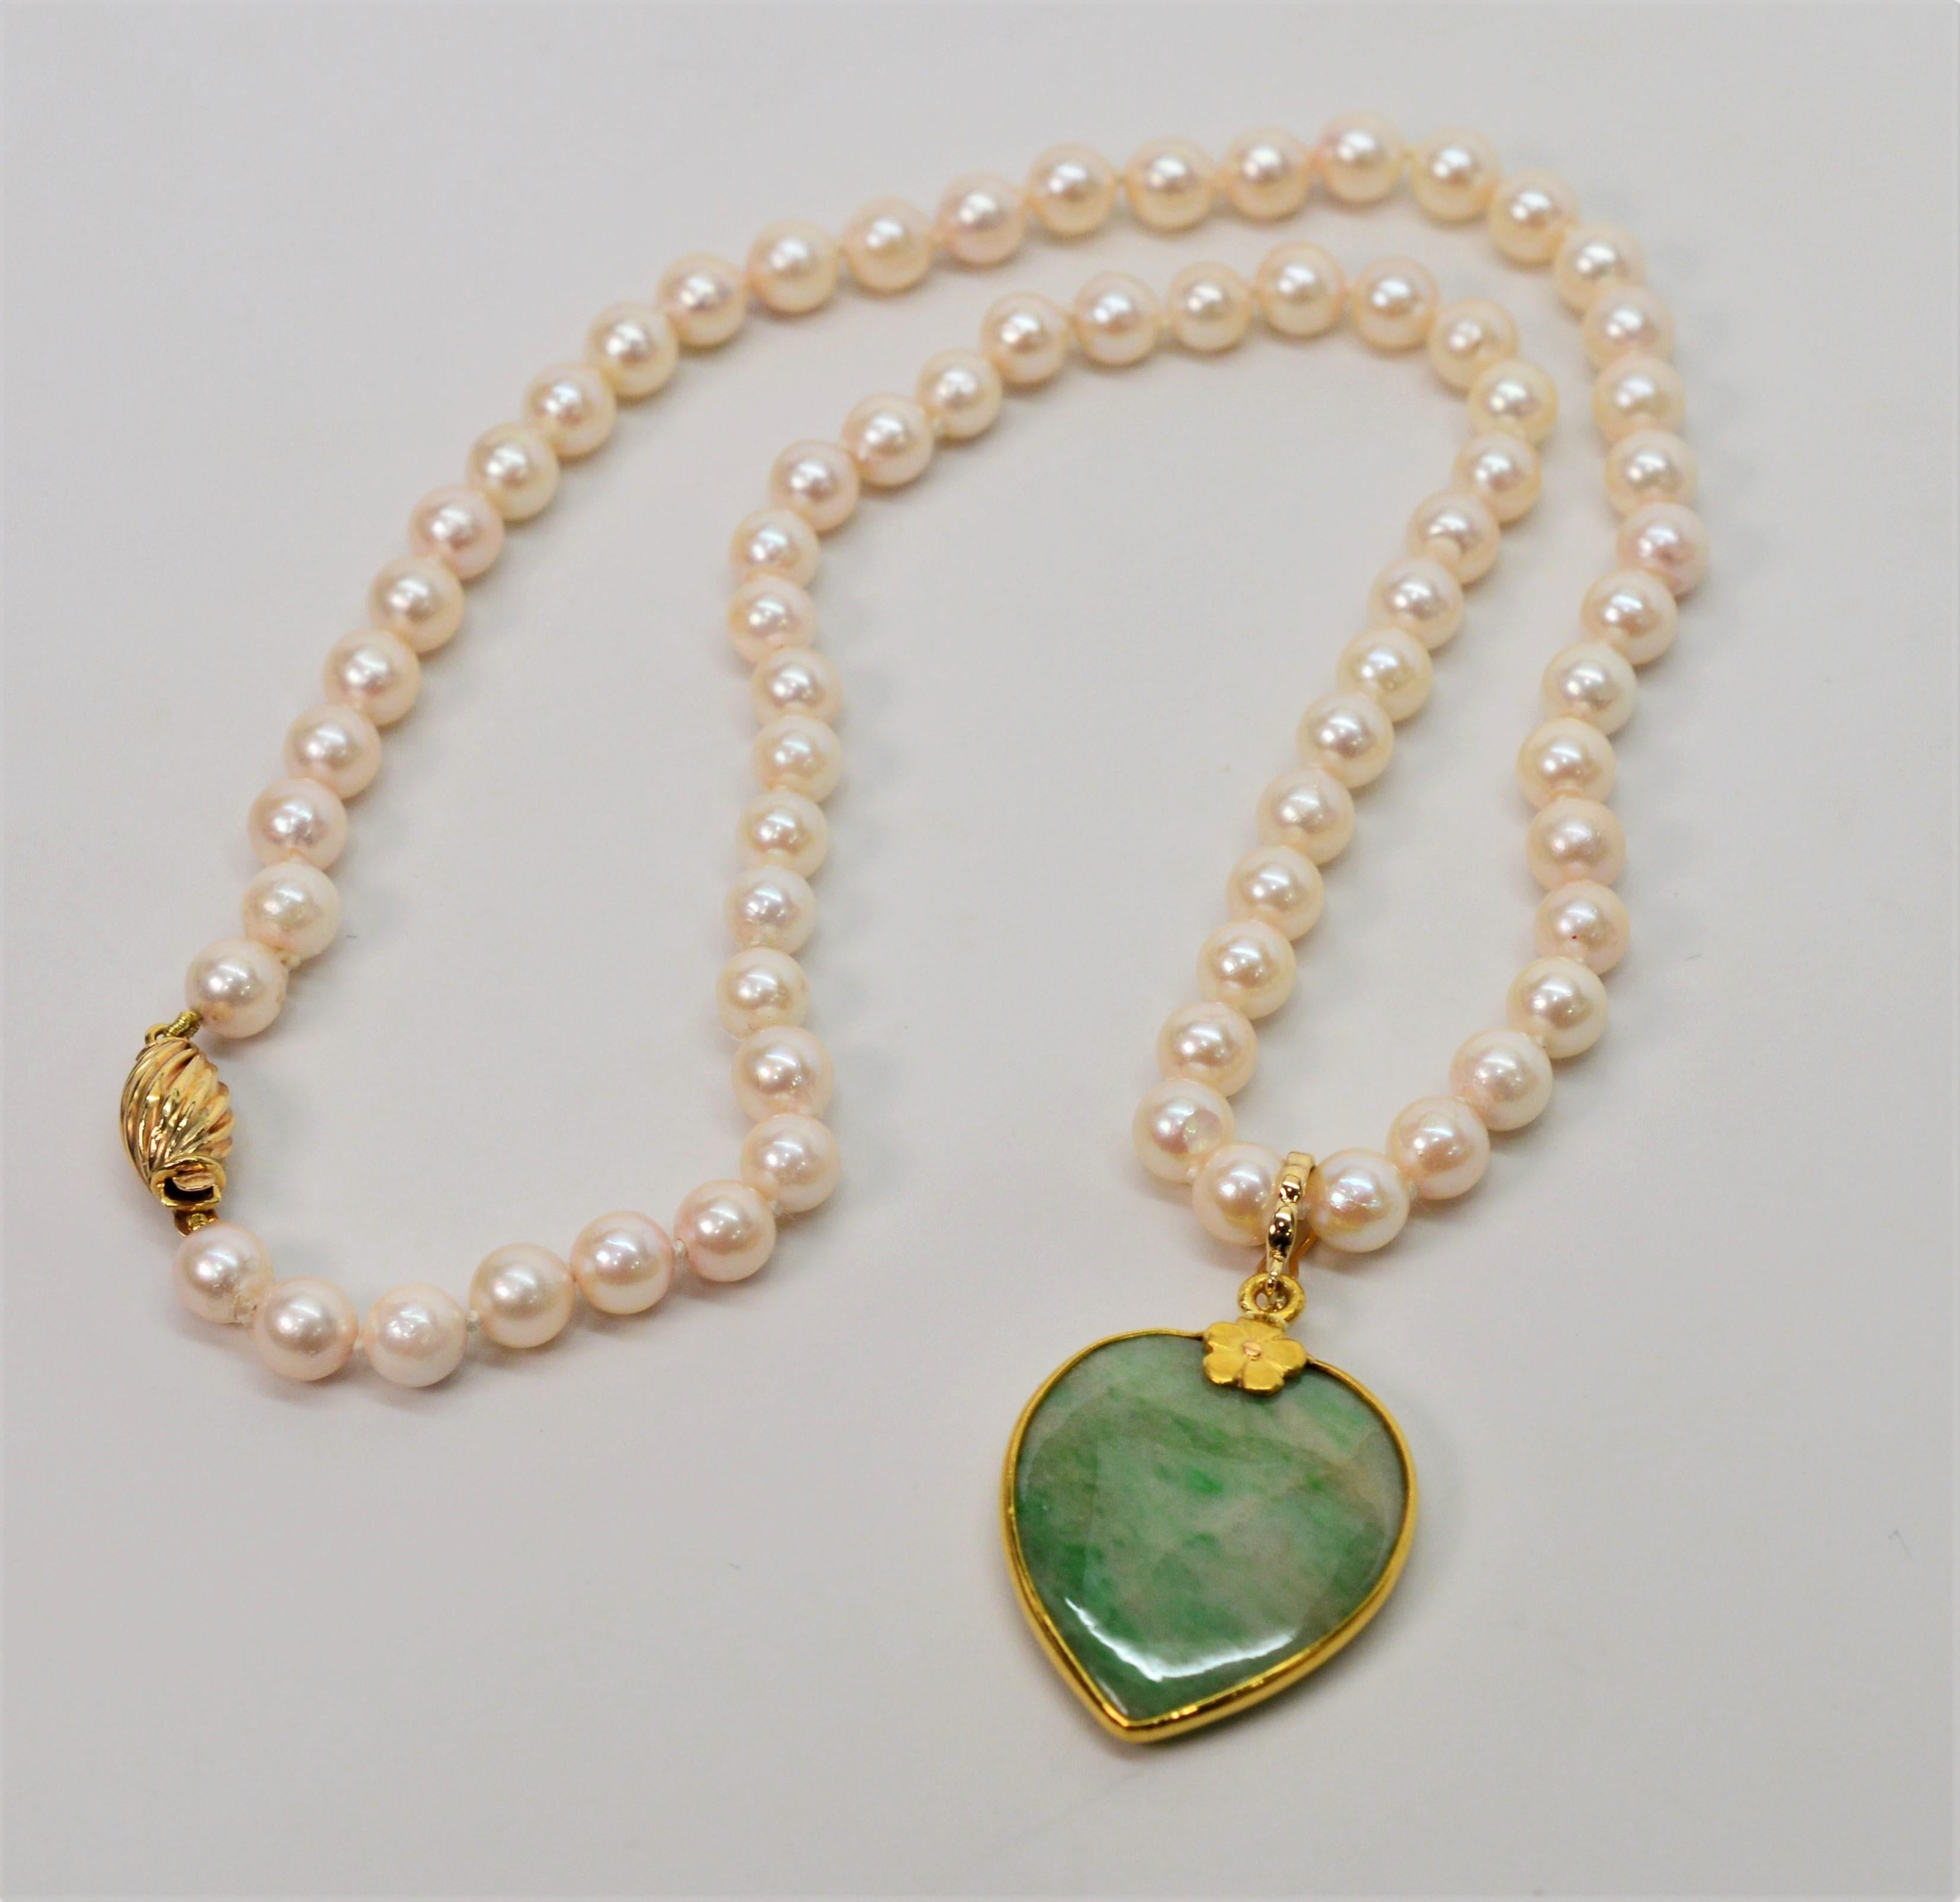 Women's Antique Jade Yellow Gold Heart Pendant on Pearl Necklace